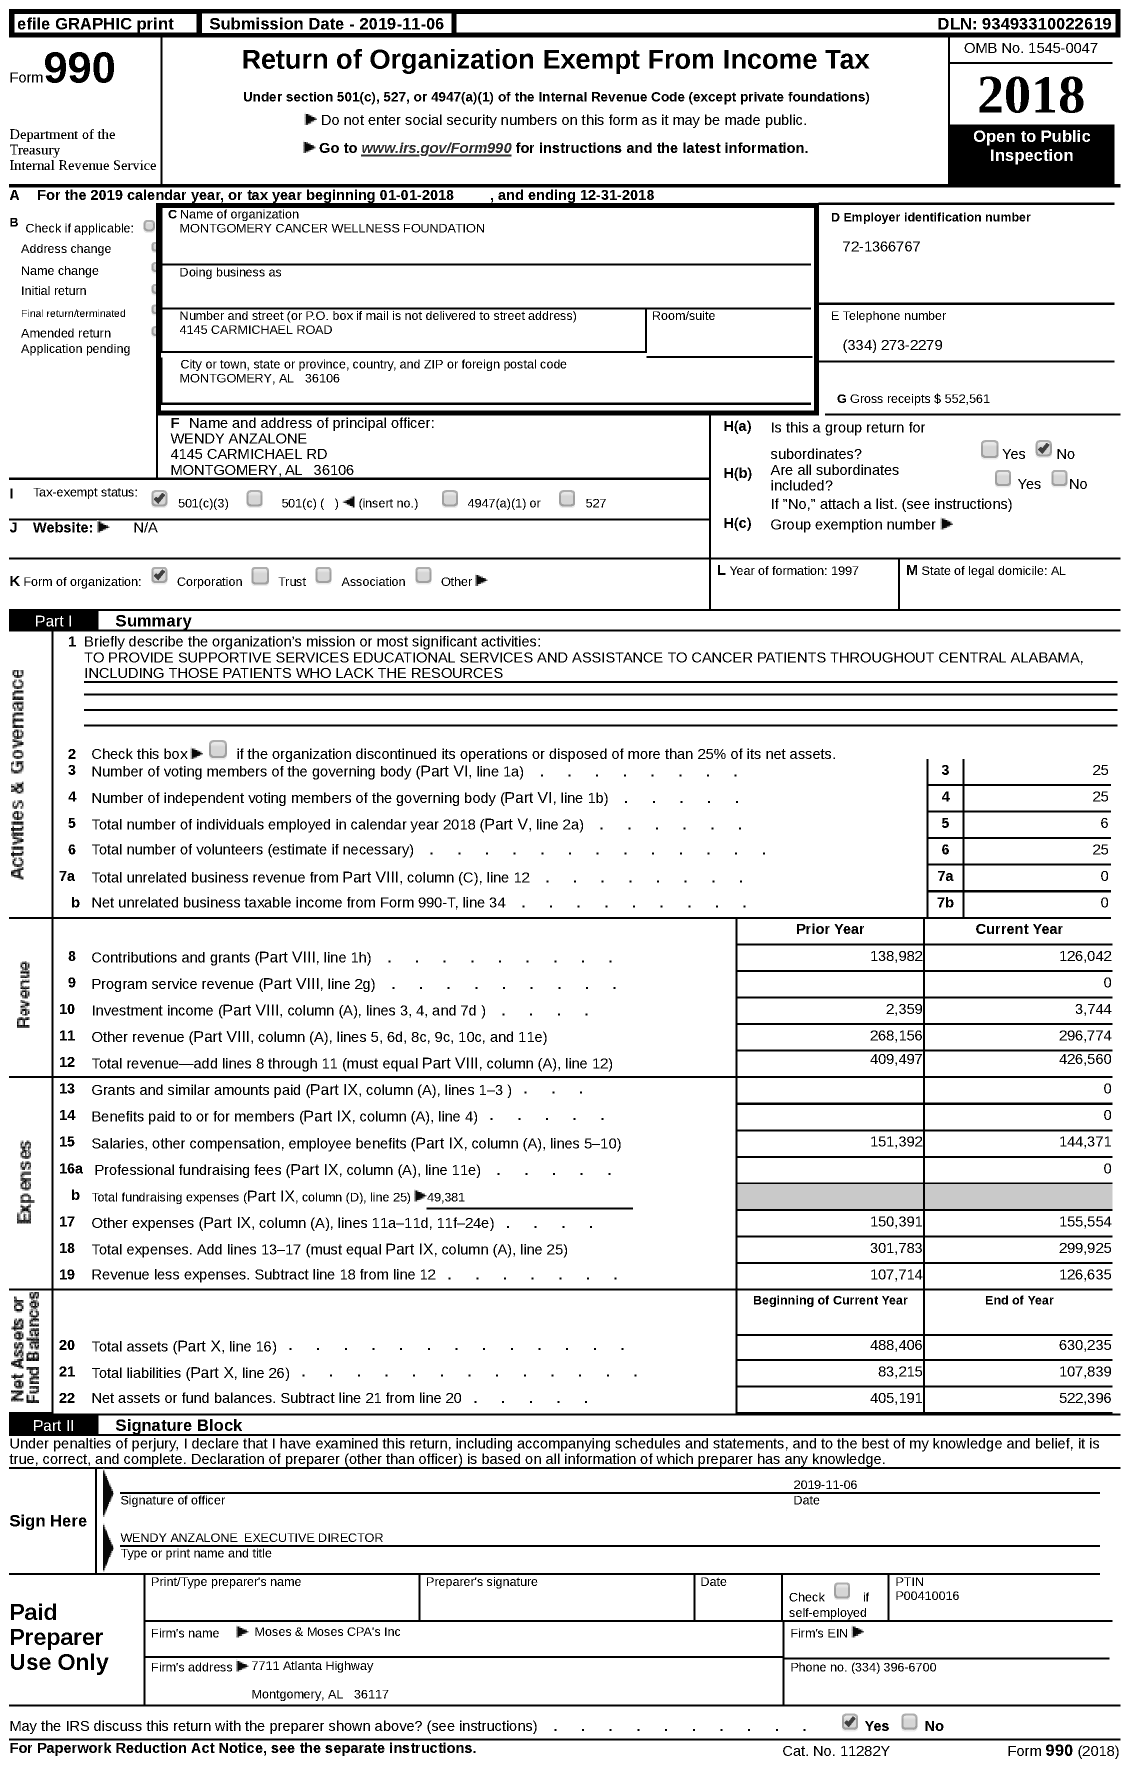 Image of first page of 2018 Form 990 for Montgomery Cancer Wellness Foundation